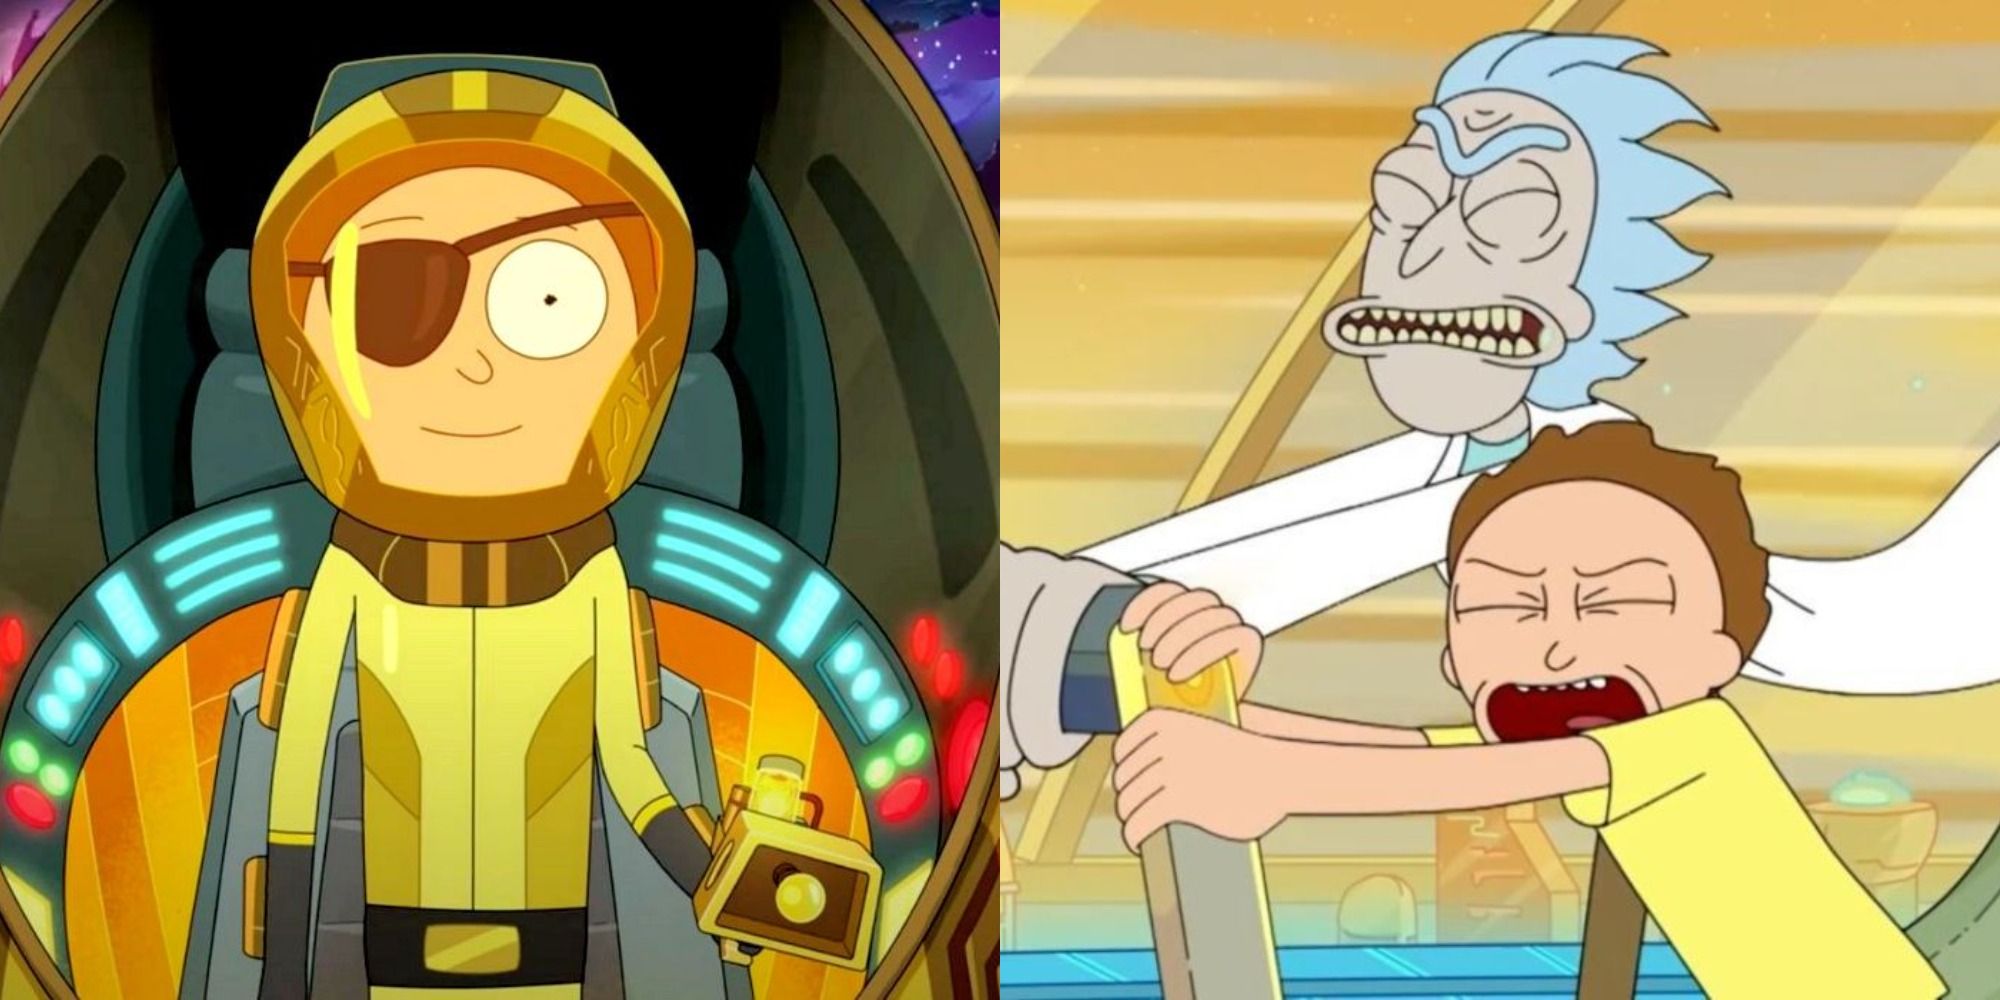 Split image showing Evil M orty escaping, and Rick and Morty with struggling faces